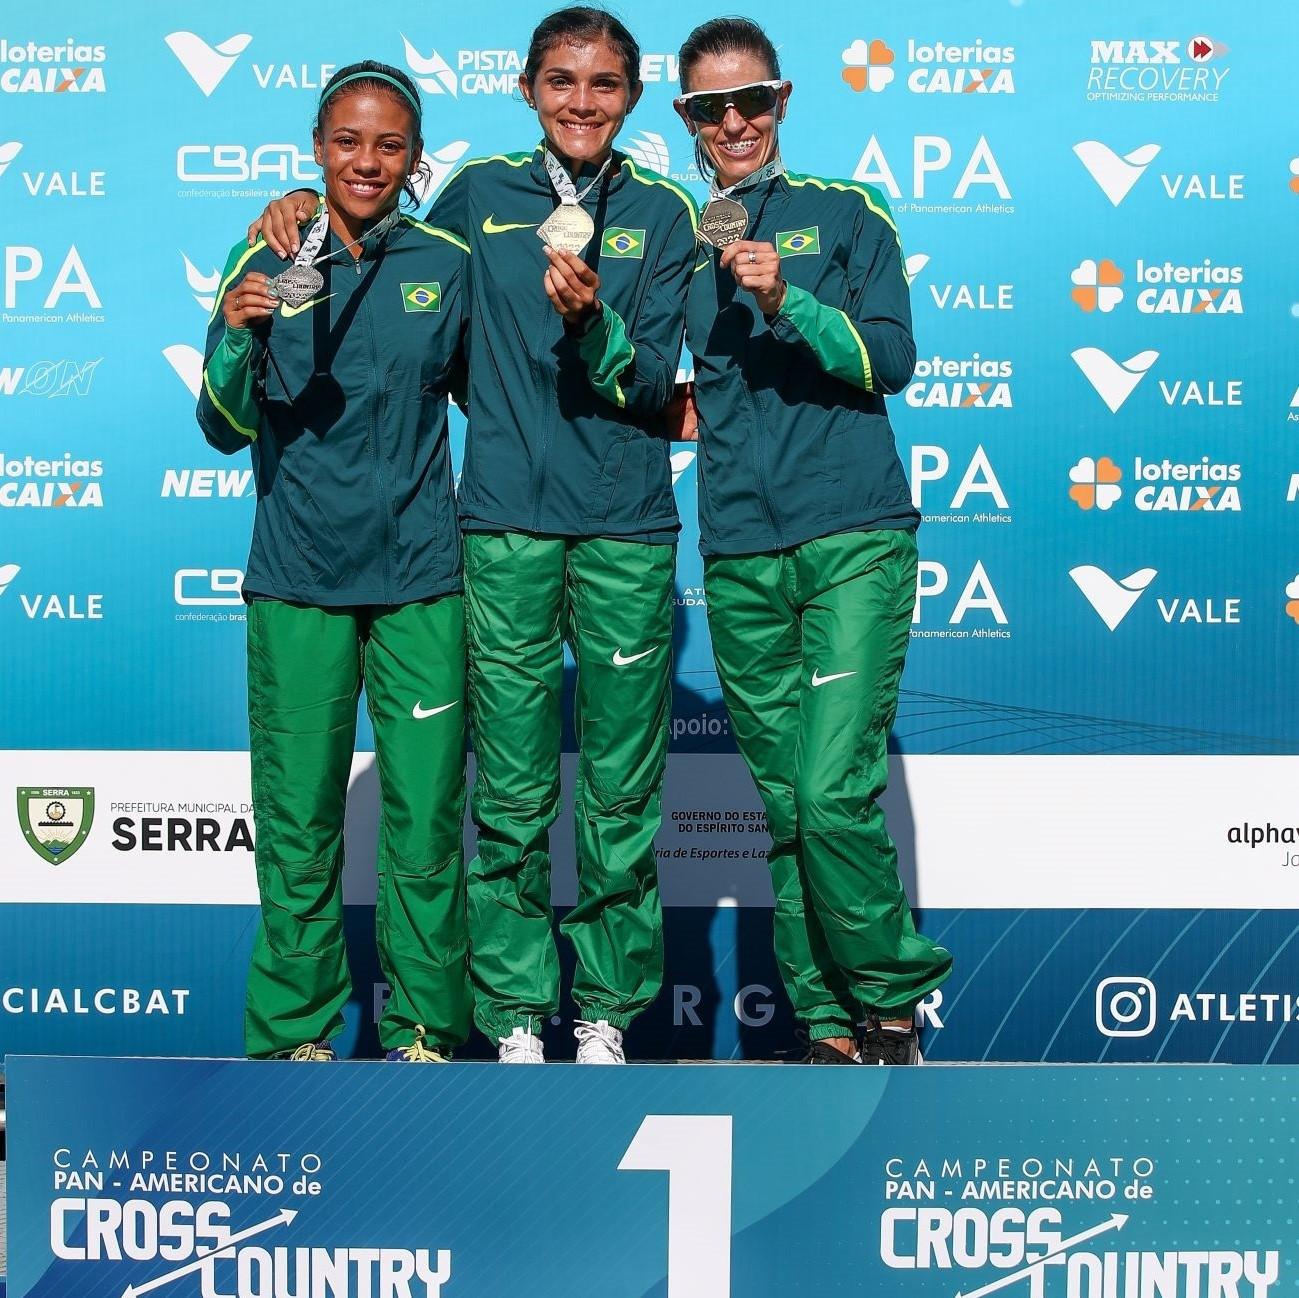 Brazil claimed a clean sweep in the women's 10 kilometres race at the Pan American Cross Country Championships in Serra ©CBAt/Wagner Carmo 